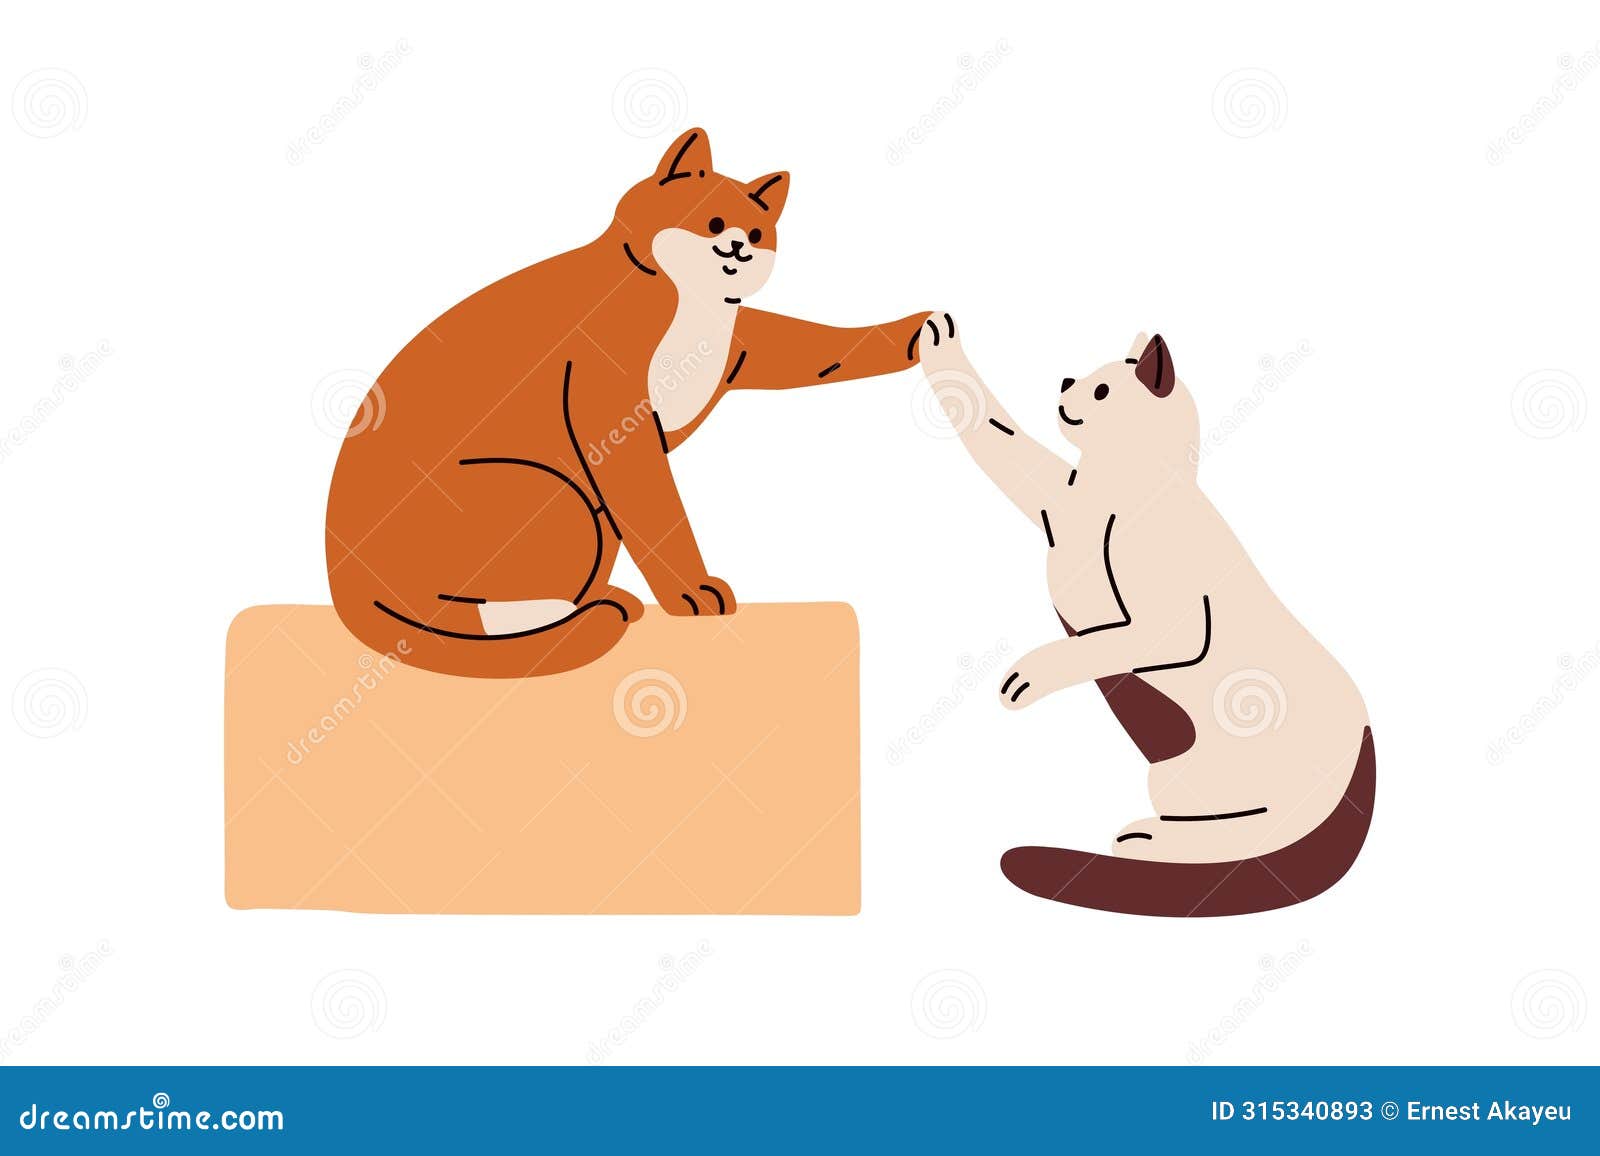 cute cats giving high five. friendly feline animals greeting with paw gesture. trained smart kitty pets, friendship and